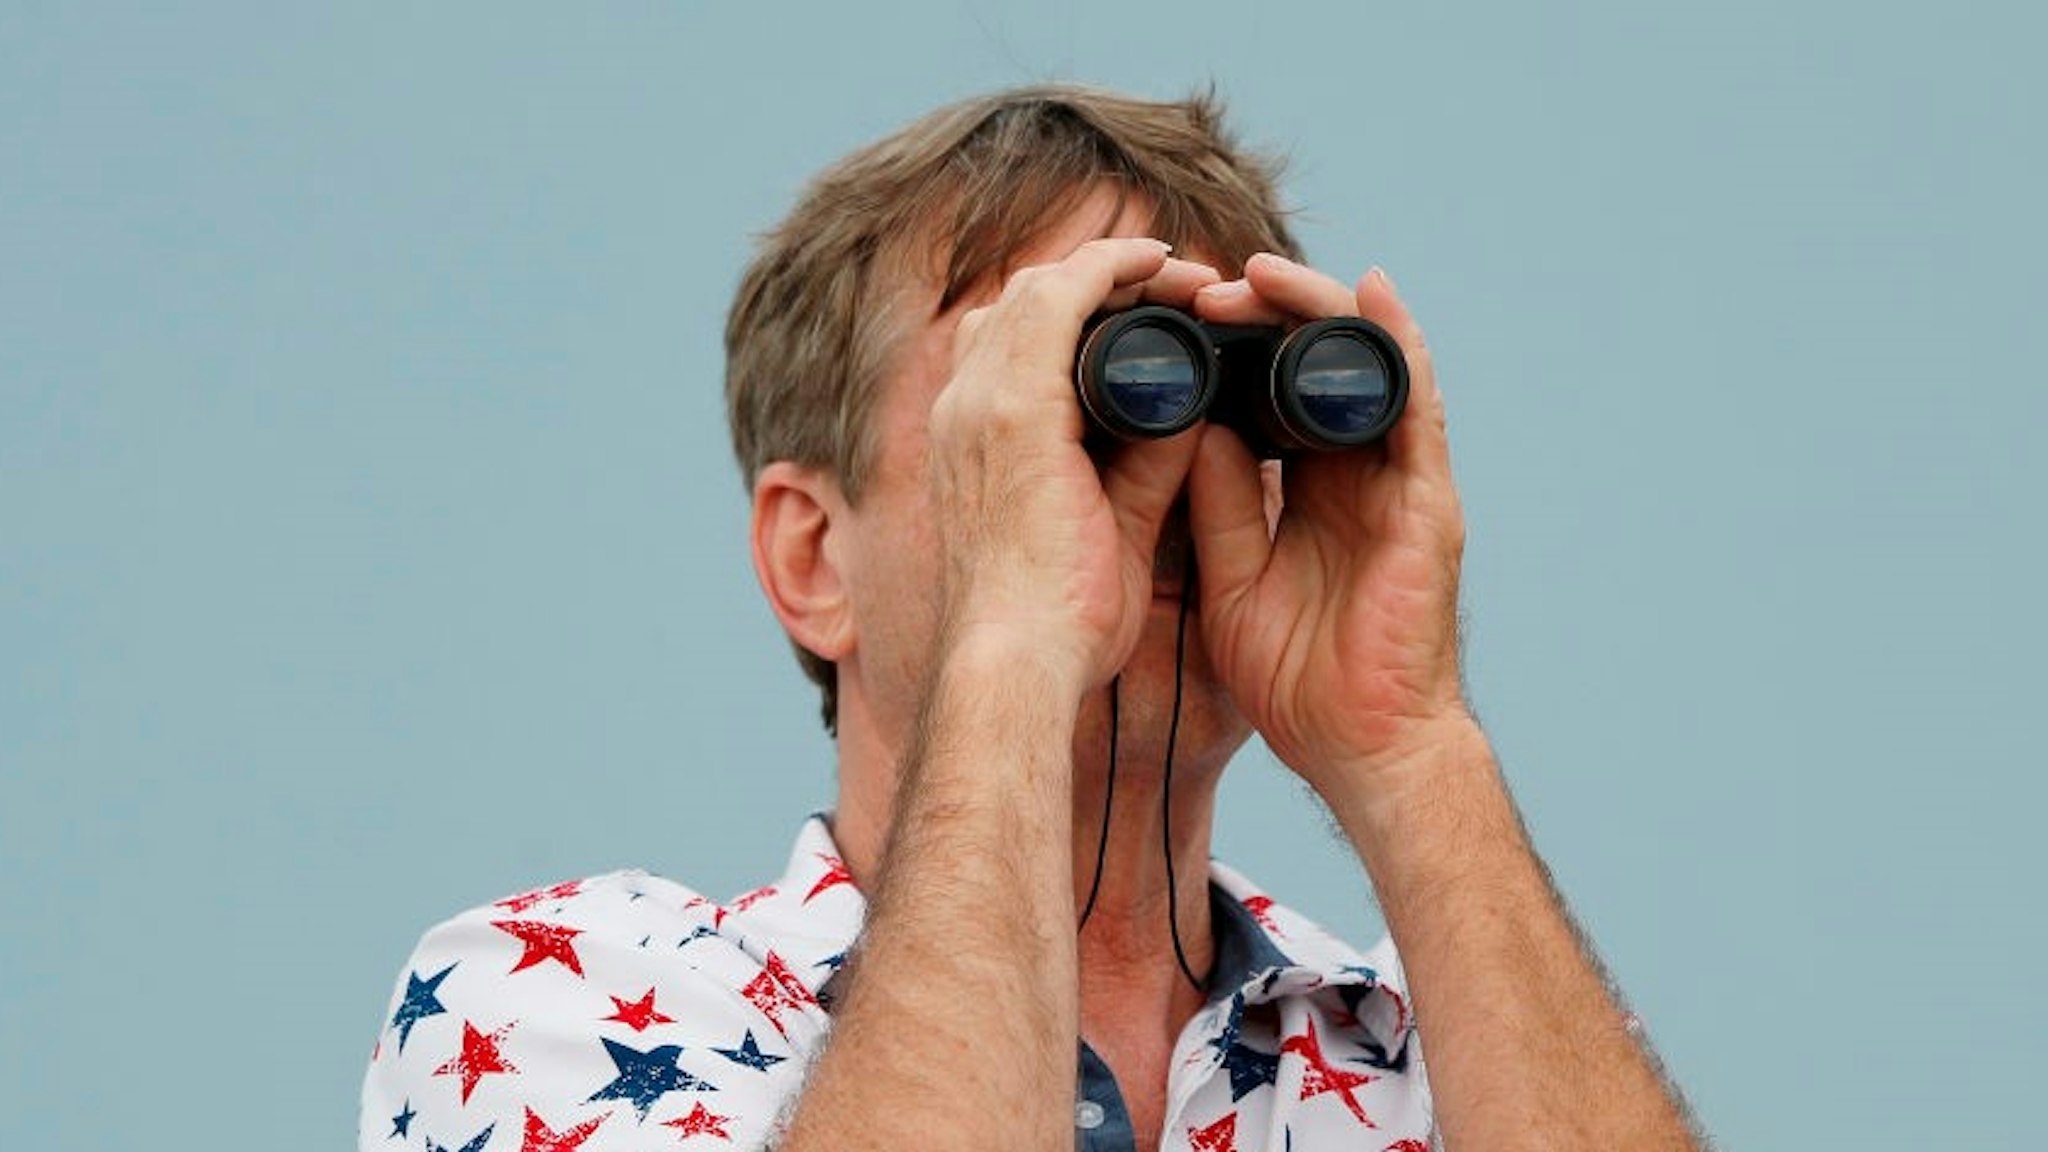 CAPE CANAVERAL, FLORIDA - MAY 27: A spectator uses binoculars to view the launch pad prior to the launch of SpaceX Falcon 9 rocket, with the manned Crew Dragon spacecraft at the Kennedy Space Center, which NASA later scrubbed due to weather conditions on May 27, 2020 in Port Canaveral, Florida. NASA will try again on Saturday for the inaugural flight that will be the first manned mission since 2011 to be launched into space from the United States. (Photo by